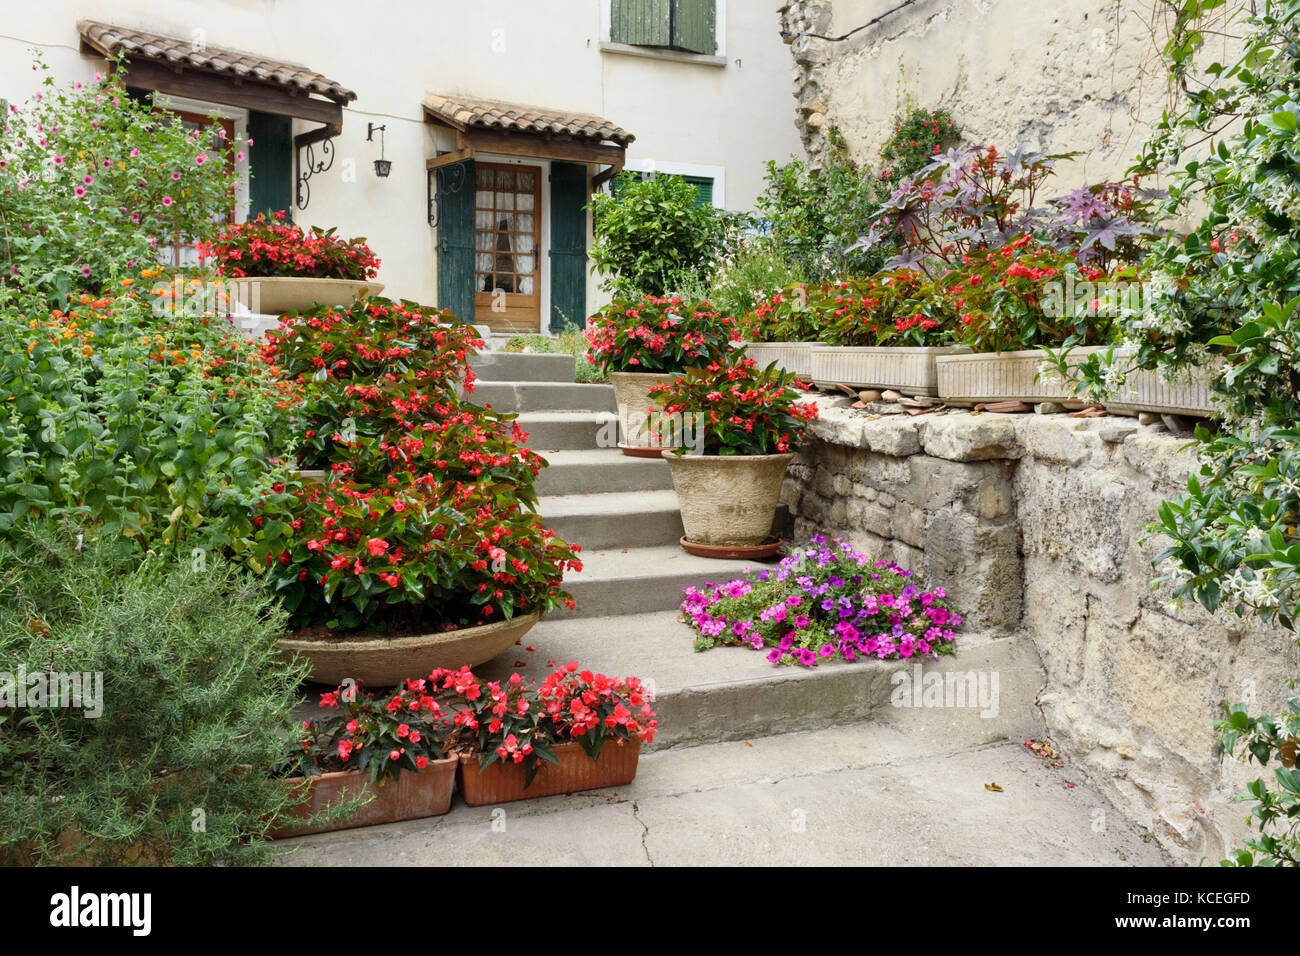 Begonias (Begonia) in flower boxes and flower pots, Arles, France Stock Photo